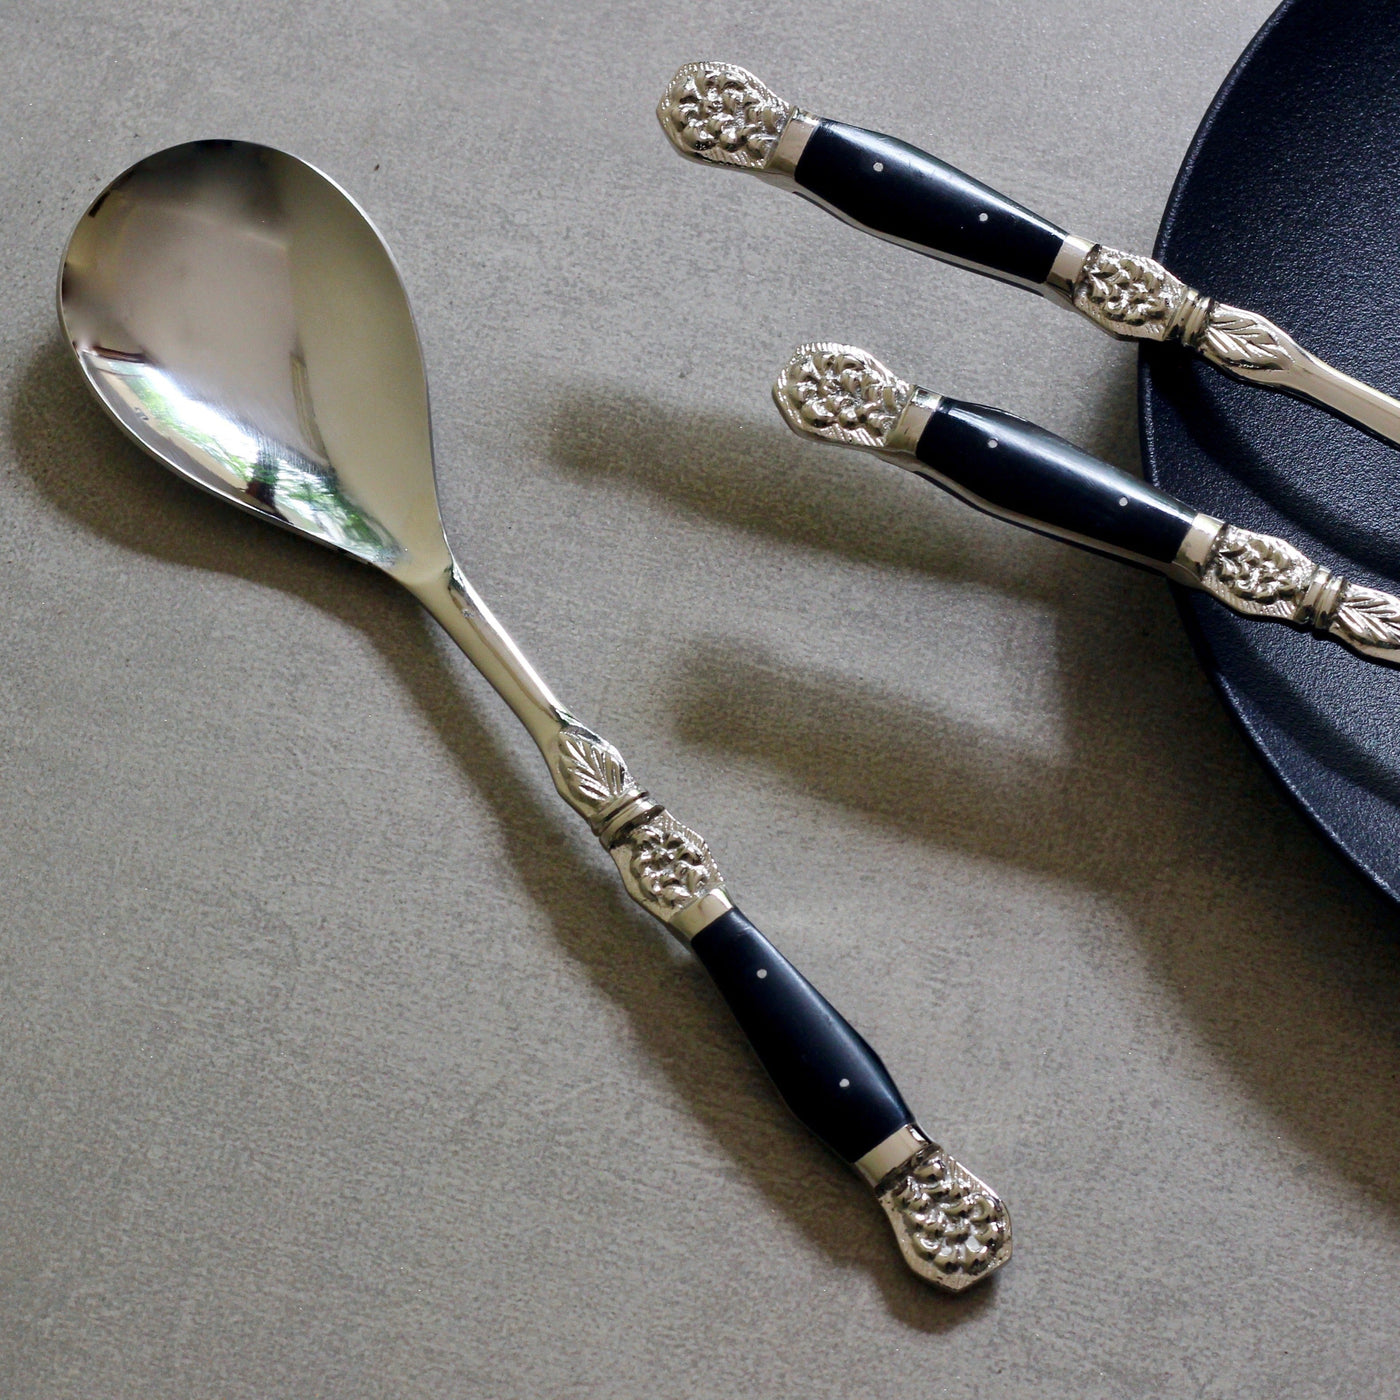 stainless steel serving spoon with black inlay handles